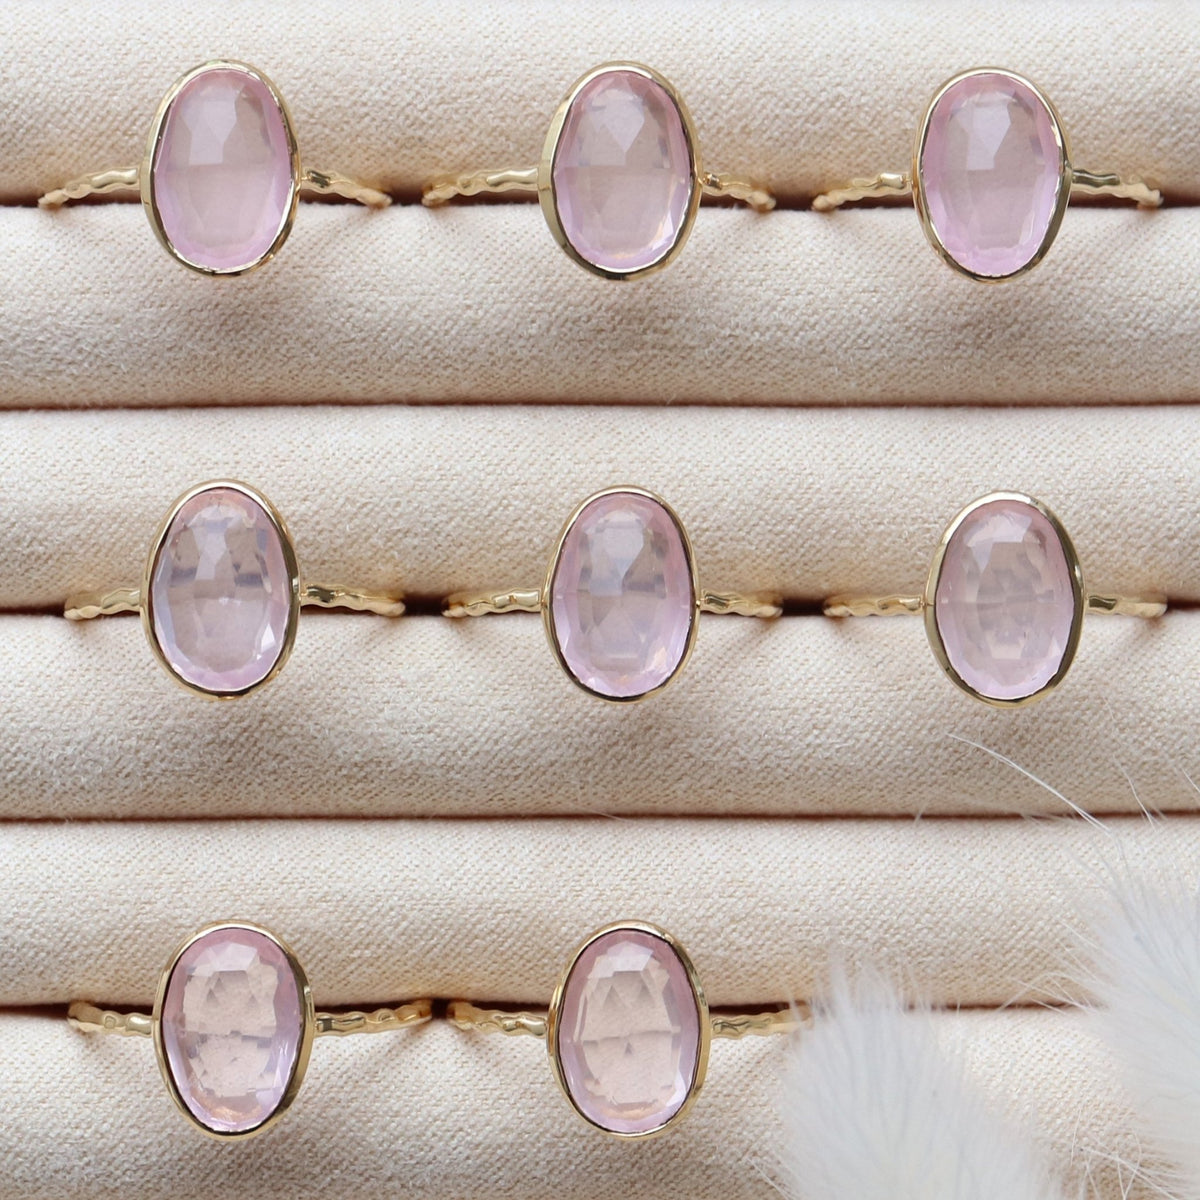 PROTECT OVAL RING - PINK QUARTZ &amp; GOLD - SO PRETTY CARA COTTER